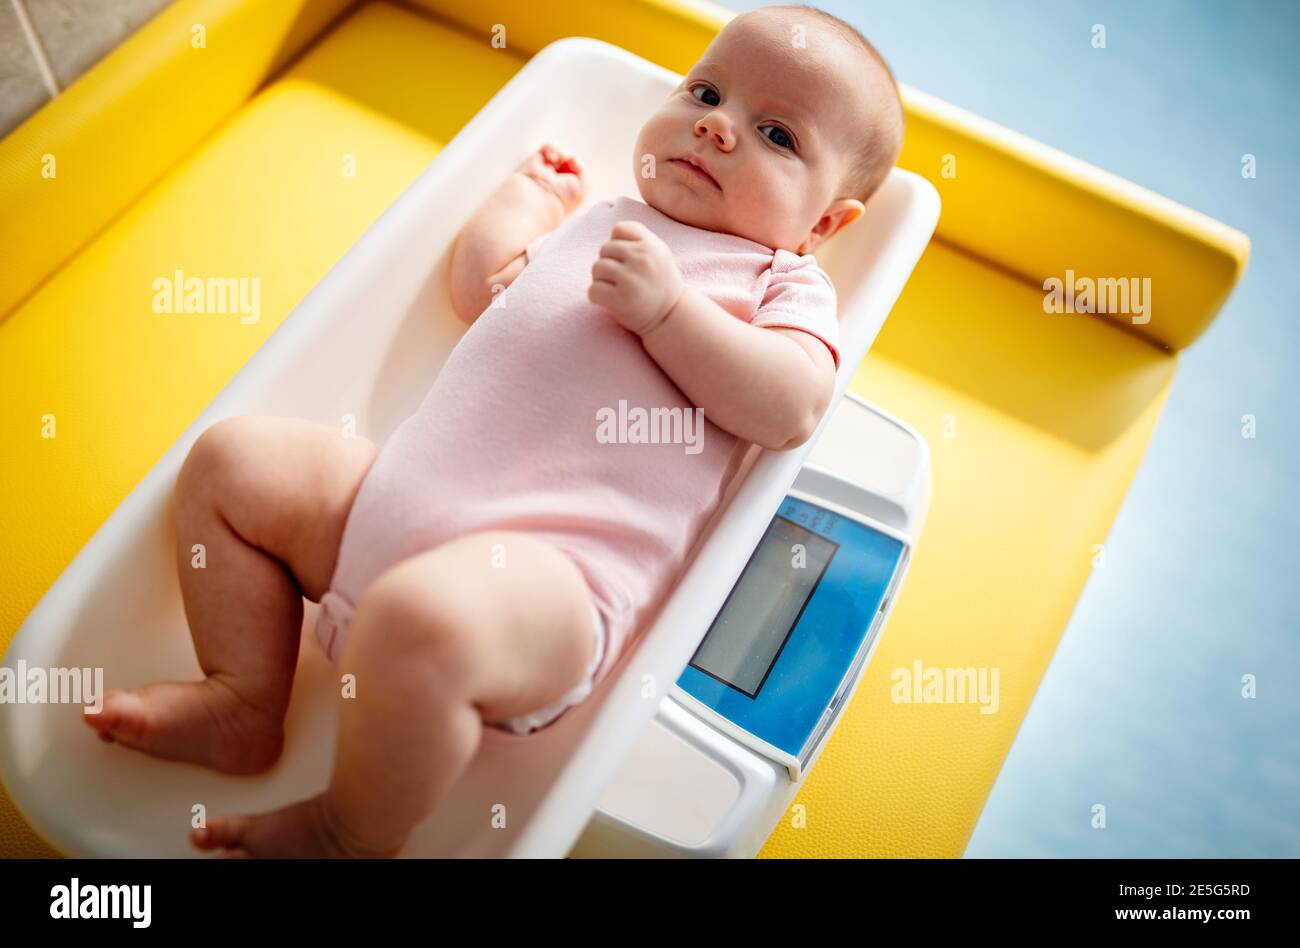 https://c8.alamy.com/comp/2E5G5RD/beautiful-newborn-baby-on-weighing-scale-health-baby-weight-concept-2E5G5RD.jpg